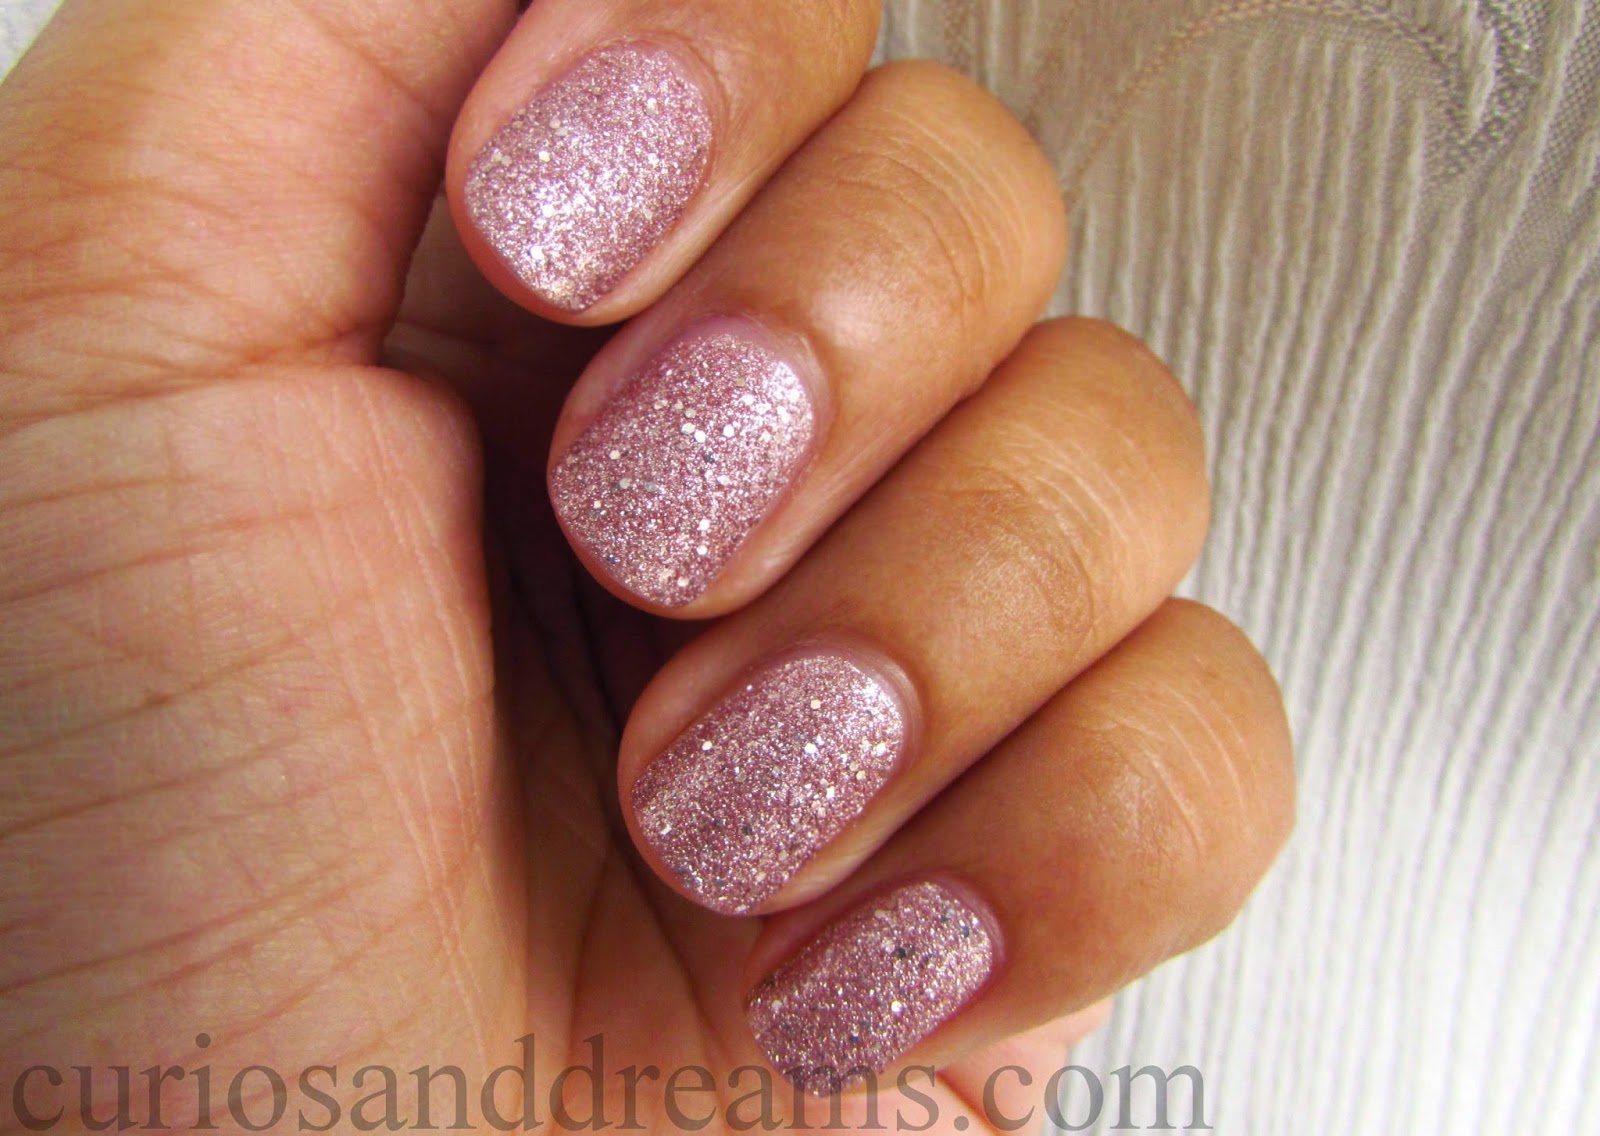 Maybelline Color Show Glitter Mania Pink Champagne review, Maybelline Glitter Mania Pink Champagne review, Maybelline Glitter Mania Pink Champagne swatch